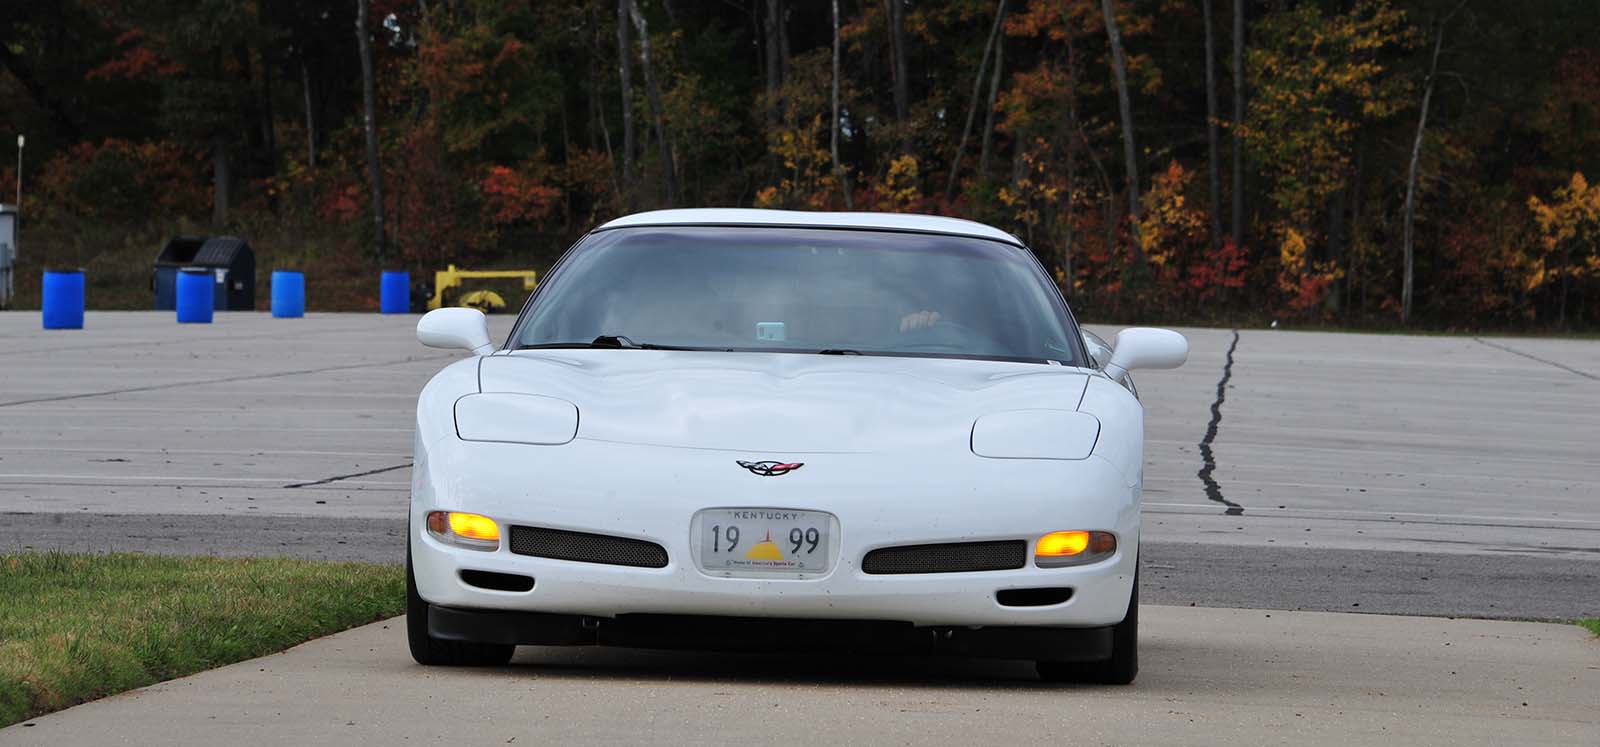 1999 Corvette Donated for New Drivers’ Learning Course